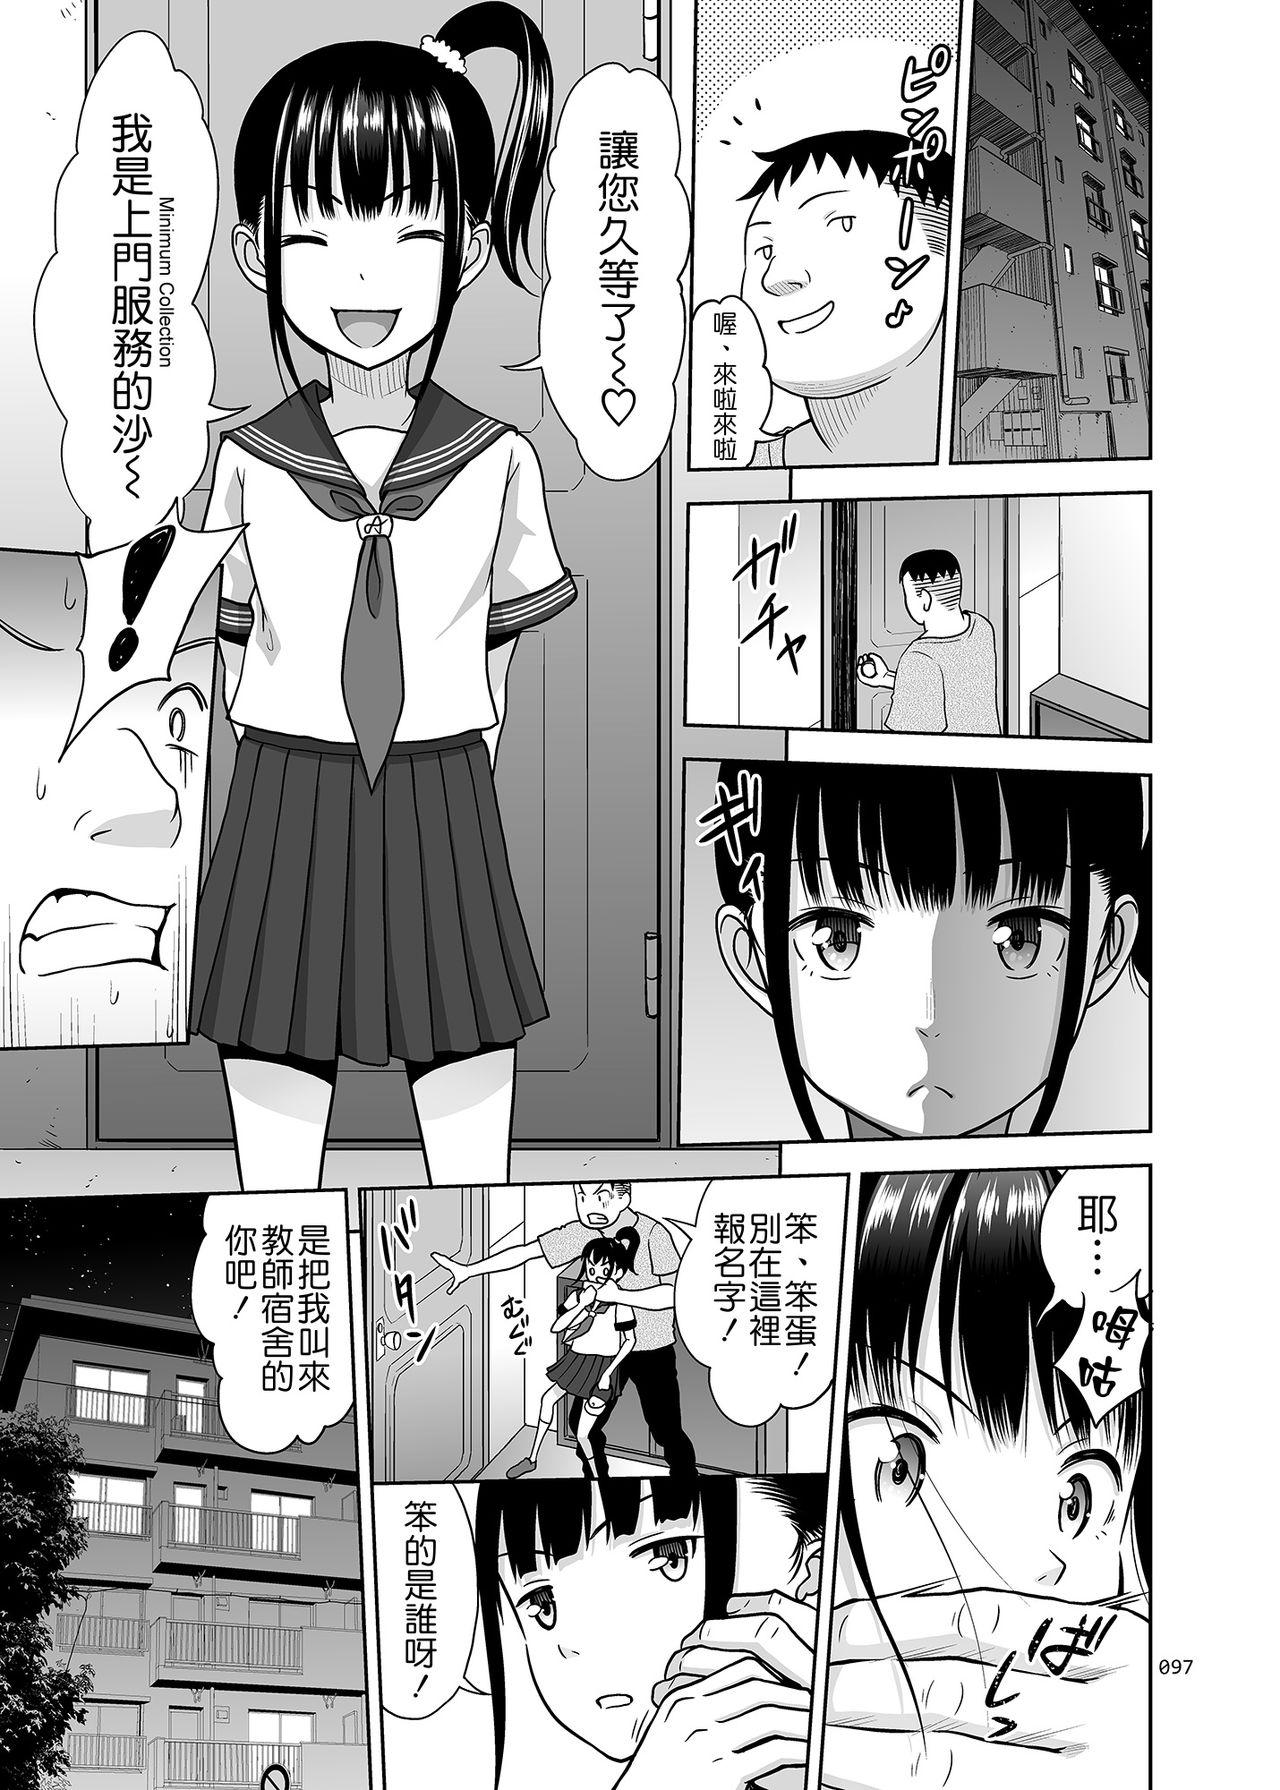 Beurette Delivery na Syoujo no Ehon 2.5 - Original Red Head - Page 8